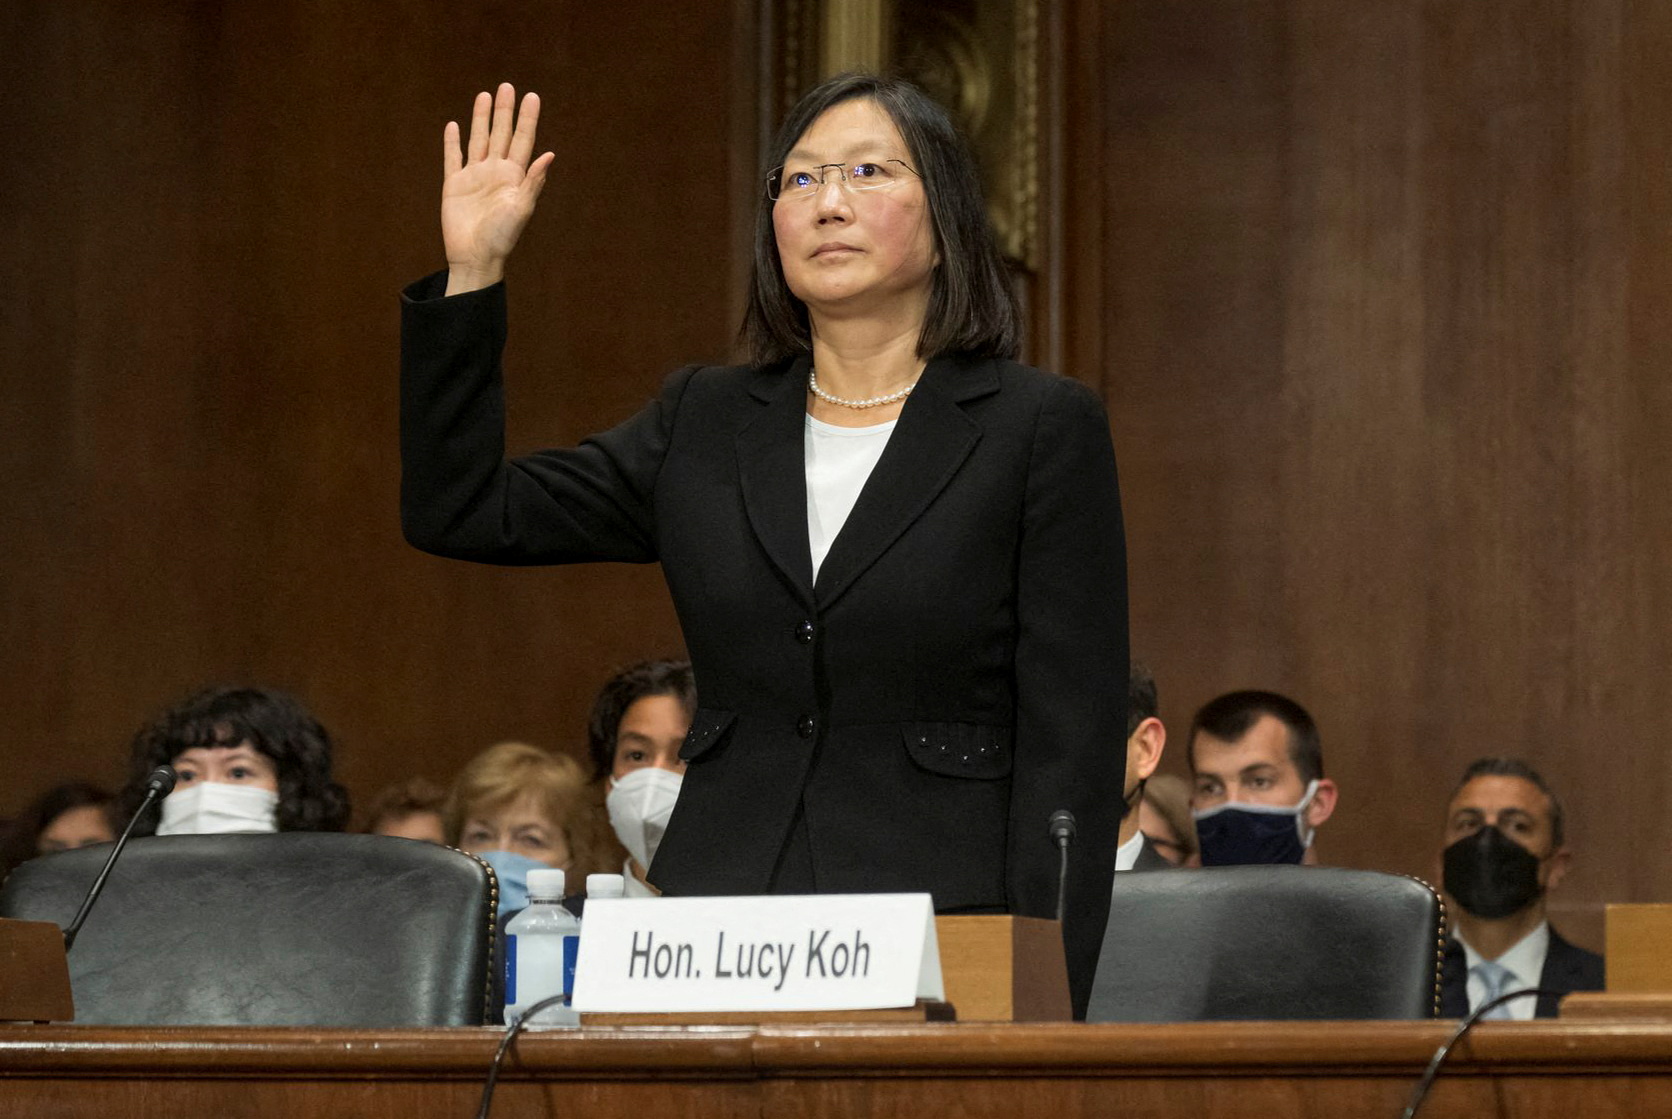 U.S. Appeals Court nominee Lucy Koh testifies before Senate Judiciary Committee hearing on Capitol Hill in Washington